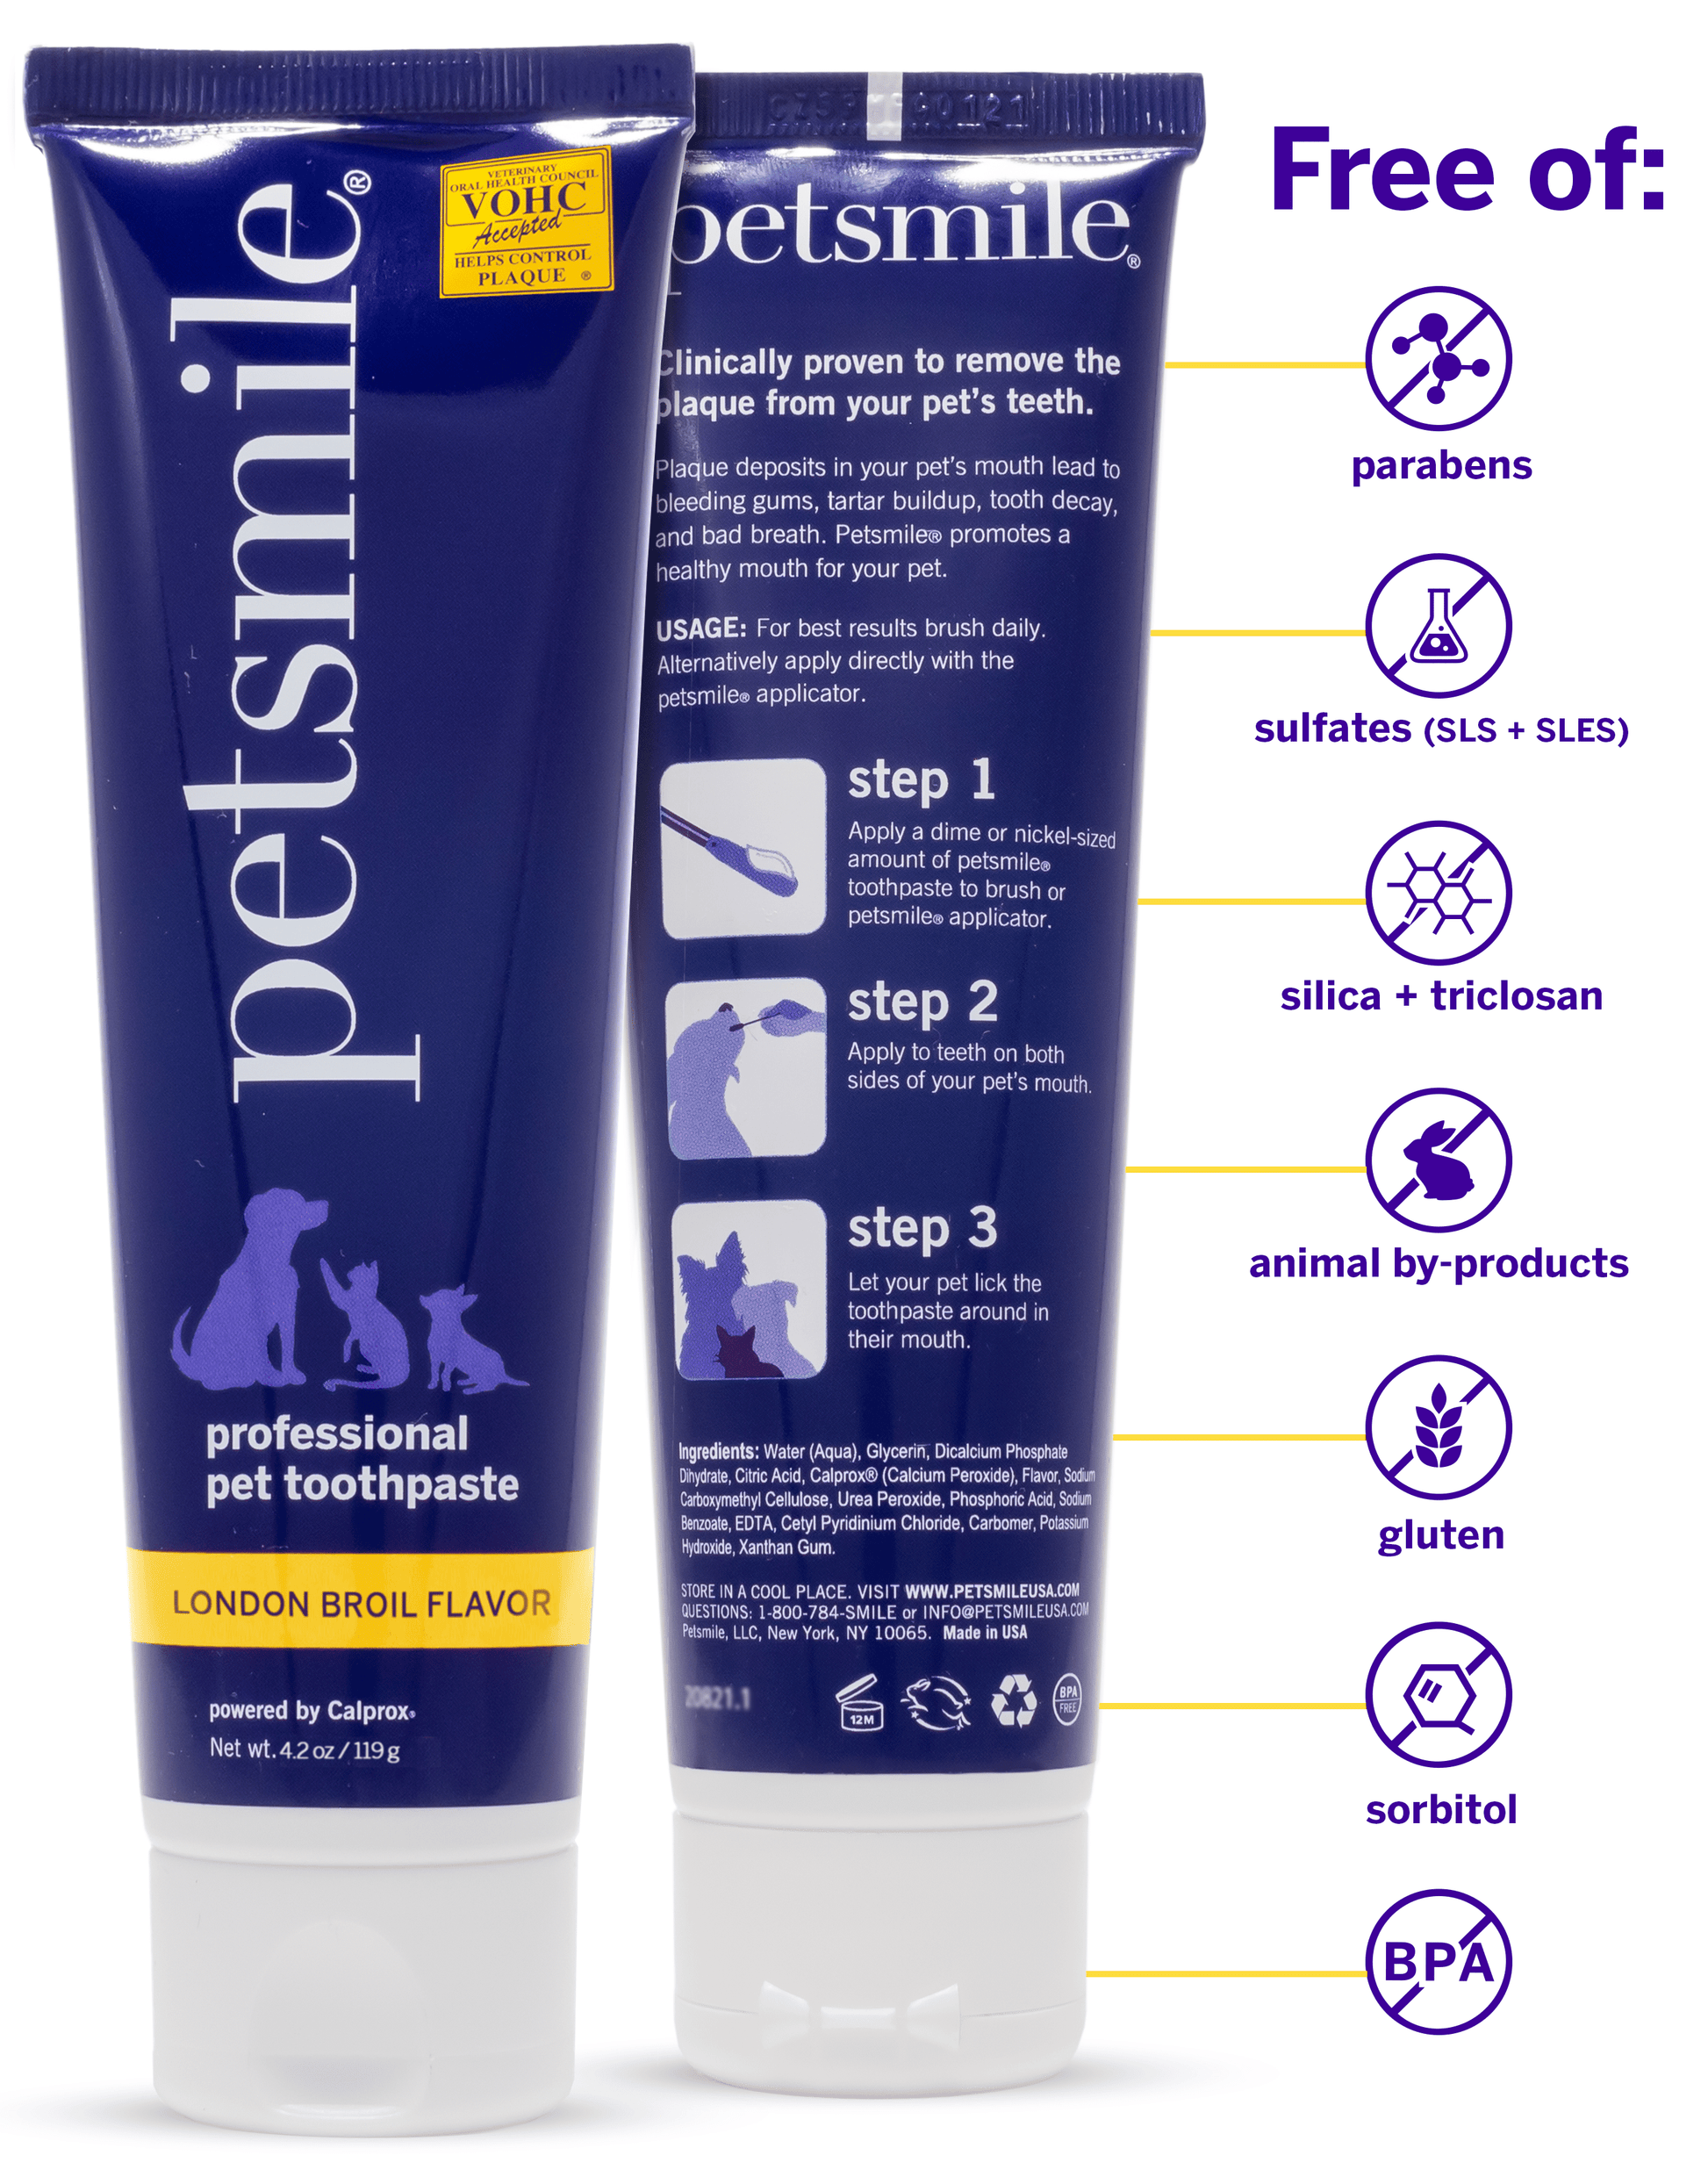 Petdentist Toothpaste Petsmile Professional Dog Cat Toothpaste | VOHC Approved Plaque and Tartar Control Toothpaste (London Broil, 4.2 Oz)